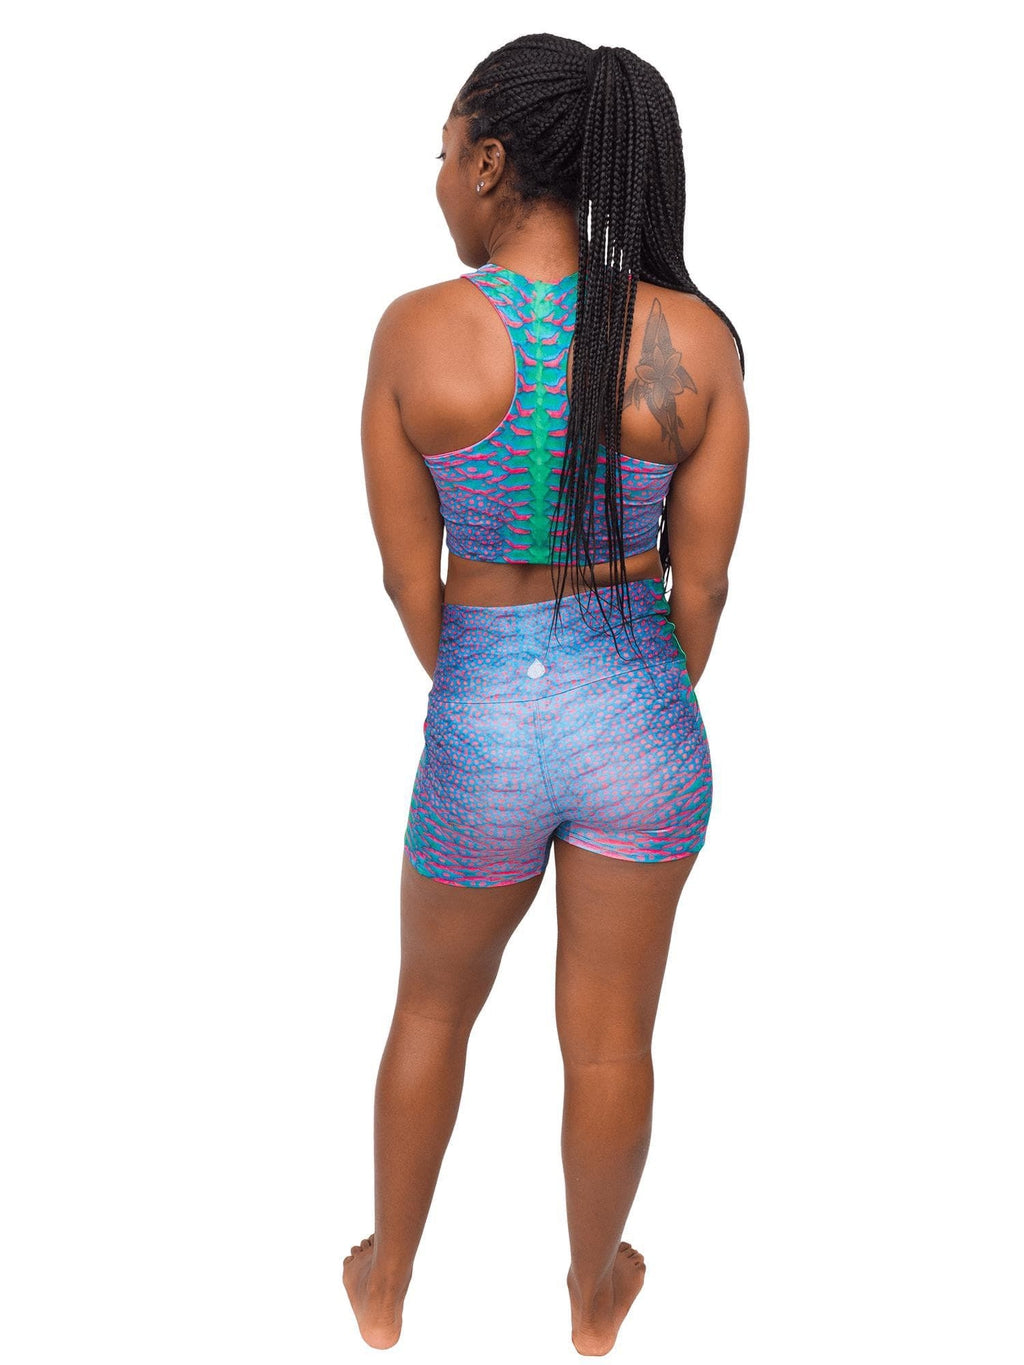 Model: Carlee is a shark &amp; sea turtle scientist and co-founder of Minorities in Shark Sciences. She is 5&#39;7&quot;, 145 lbs, 36C and is wearing a M short and S top.